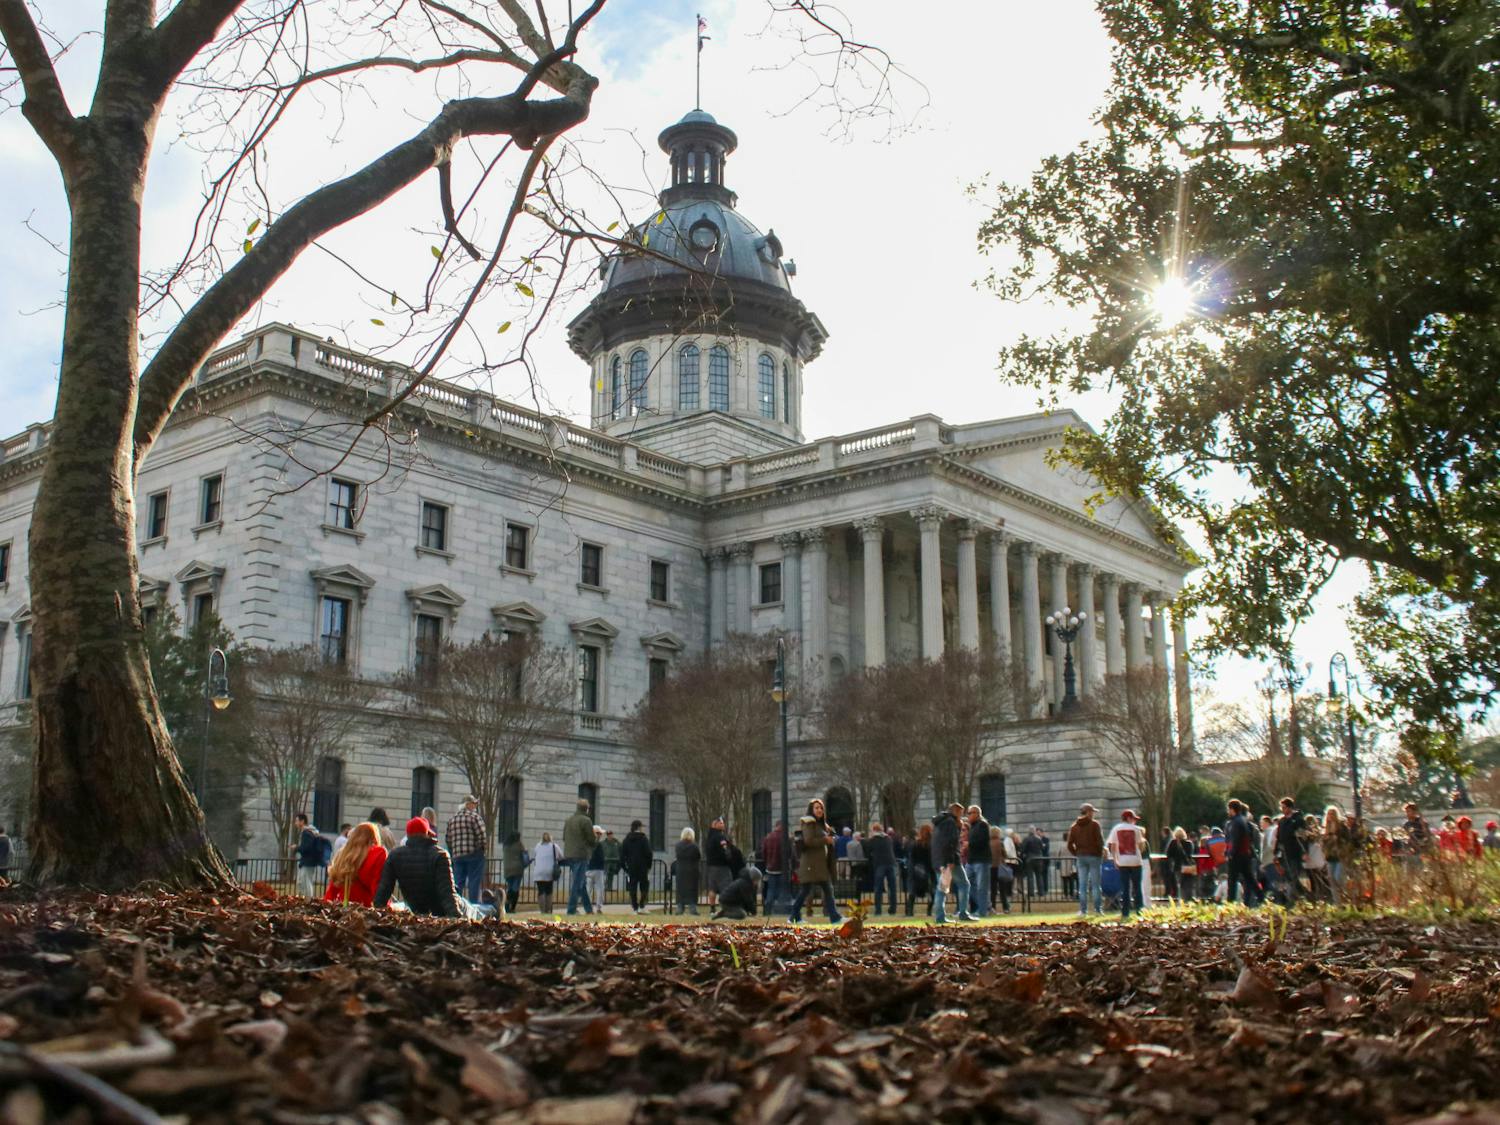 Former President Donald Trump arrived for his first campaign trip at the South Carolina Statehouse on Jan. 28, 2023. Although the event was limited to 500 guests, this boundary — and the fence — did not stop Trump supporters from showing their adoration for the potential 2024 presidential candidate. Aside from a few verbal altercations between a Trump supporter and a trio of counter protestors, the day was peaceful. As the sun set over the Statehouse, people pulled out their phones and streamed Trump's message, experiencing the event in their own way — on the other side of the fence.&nbsp;